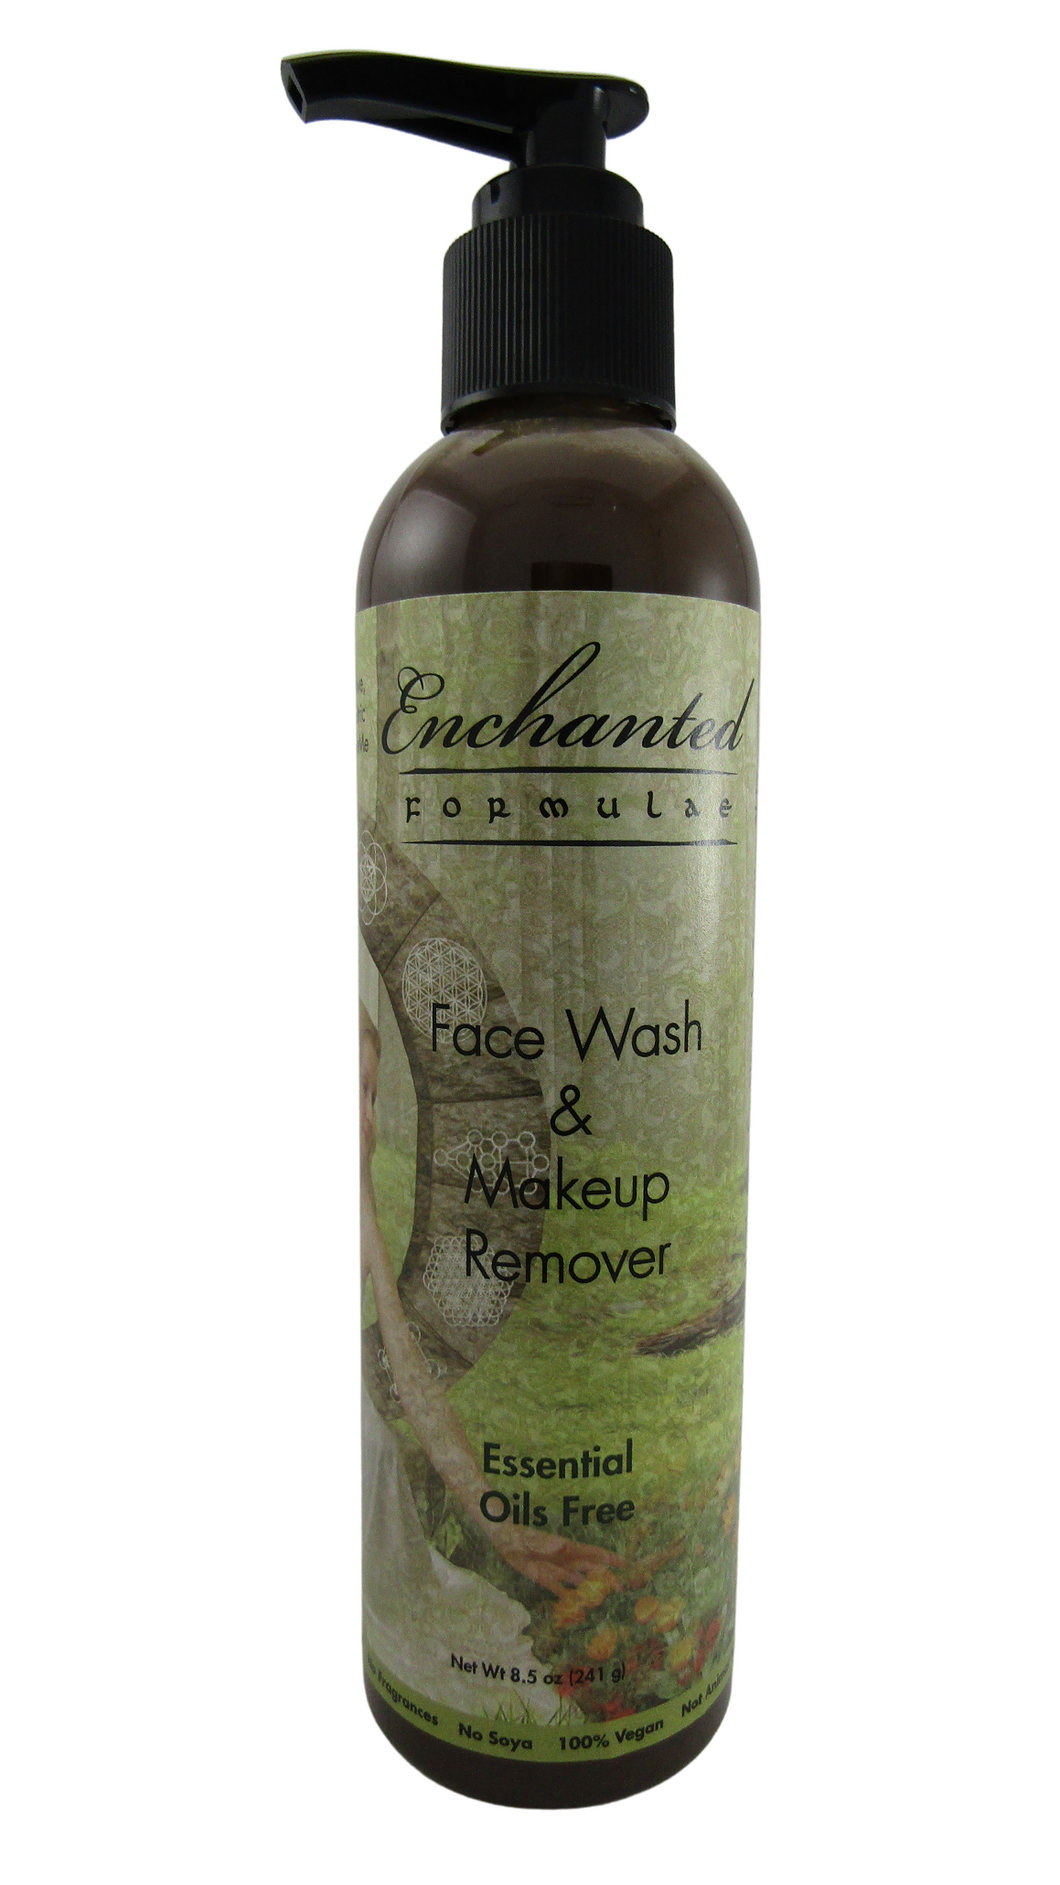 Normal to Highly Sensitive Skin FACE WASH & MAKEUP REMOVER Essential Oils Free